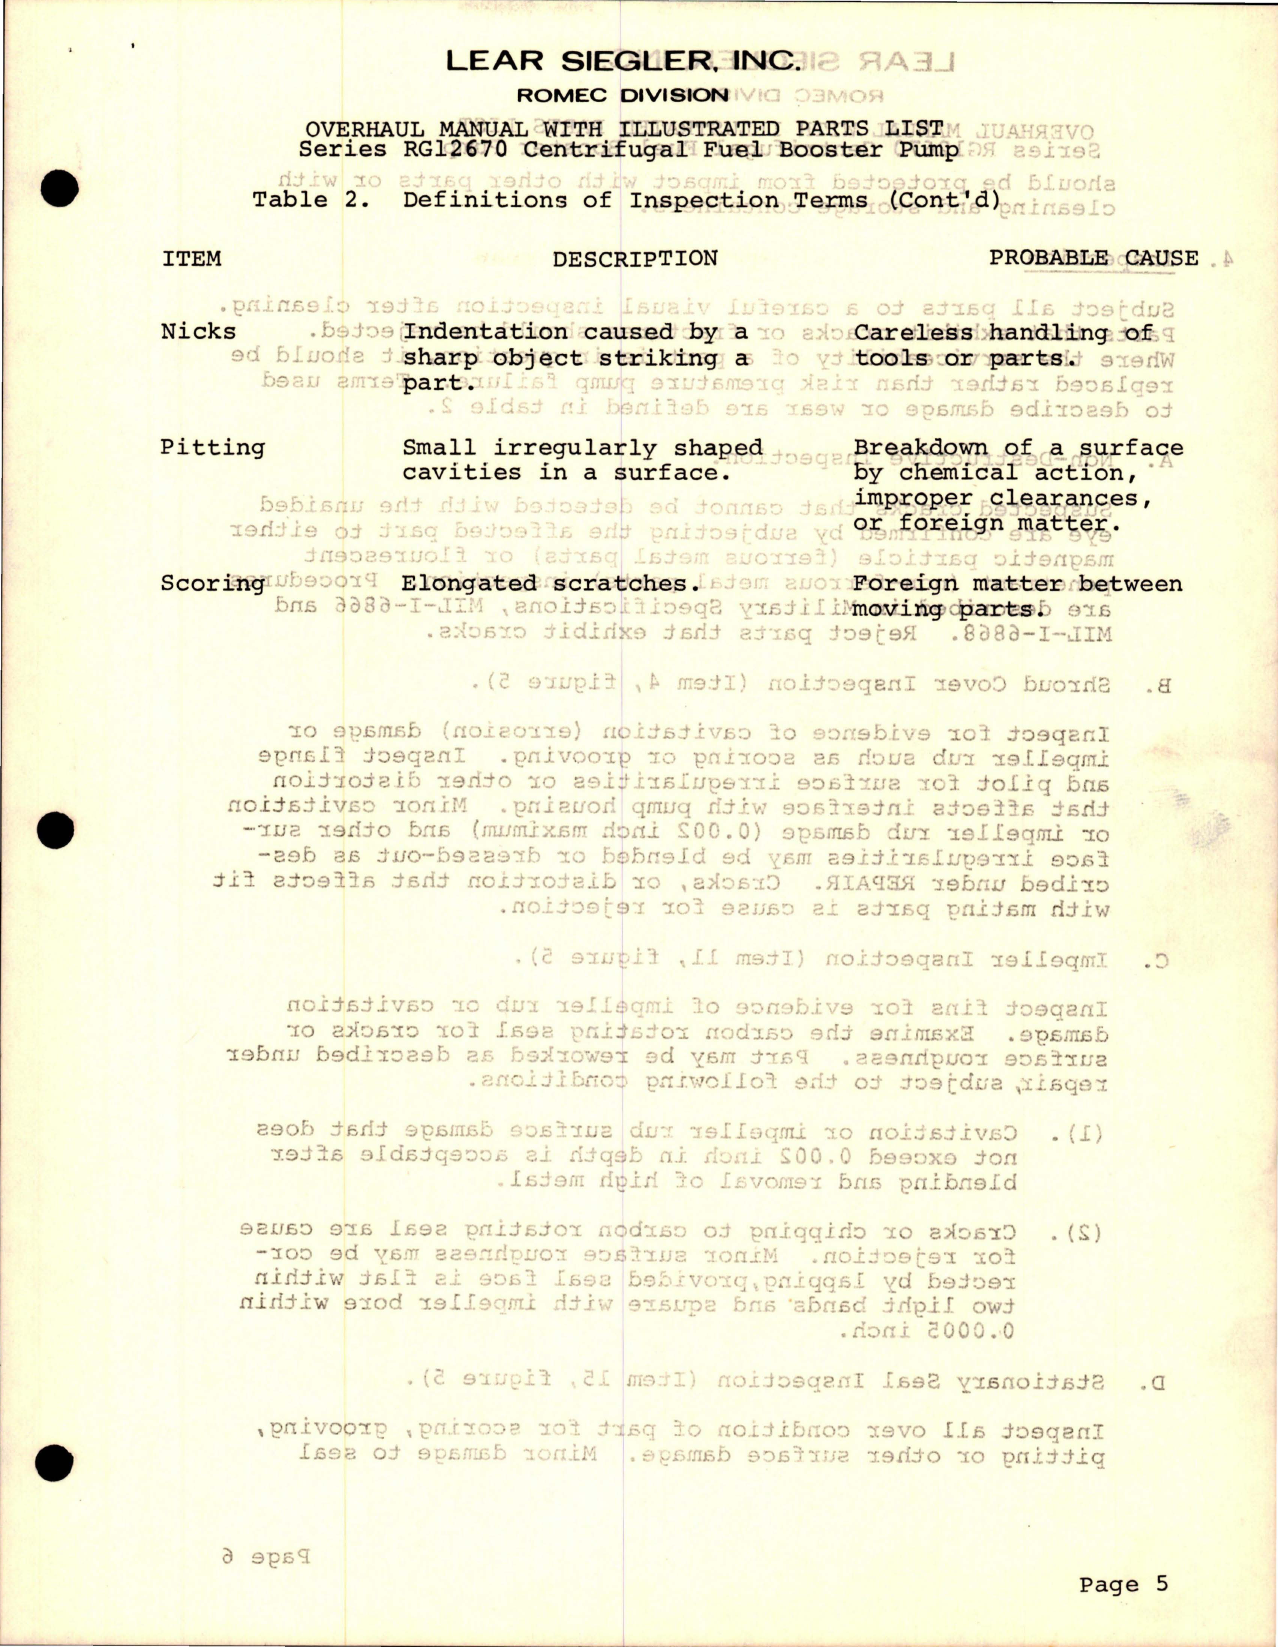 Sample page 7 from AirCorps Library document: Overhaul Manual with Parts List for Centrifugal Fuel Booster Pump - Series RG12670 